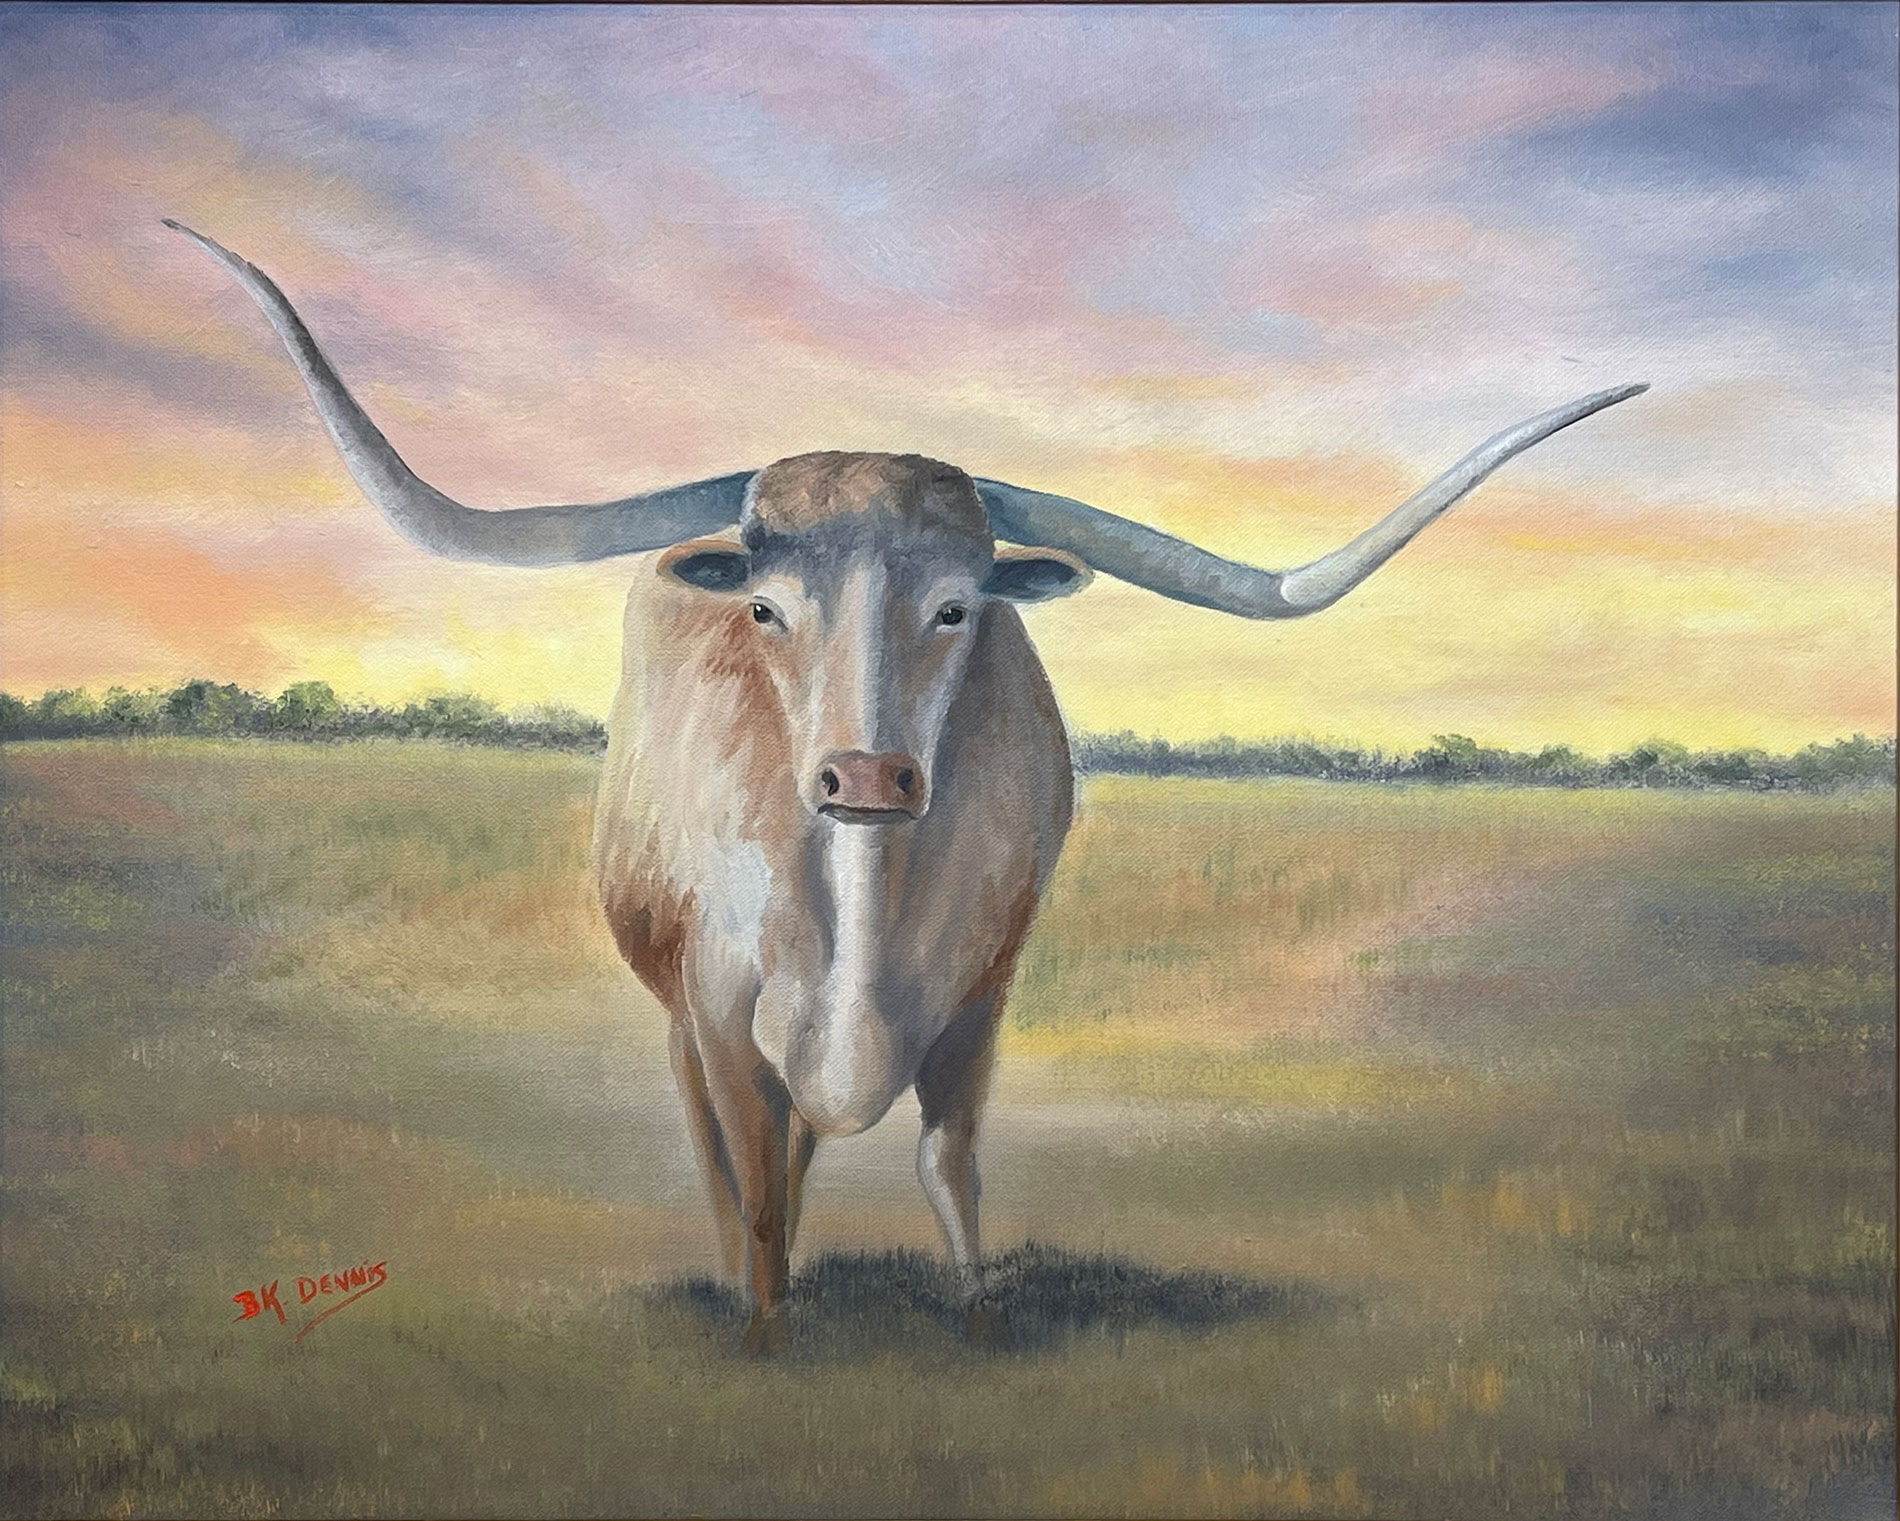 A longhorn steer standing looking straight ahead at the viewer with a beautiful sunset behind him. An oil painting by B.K. Dennis of Alpine, TX.